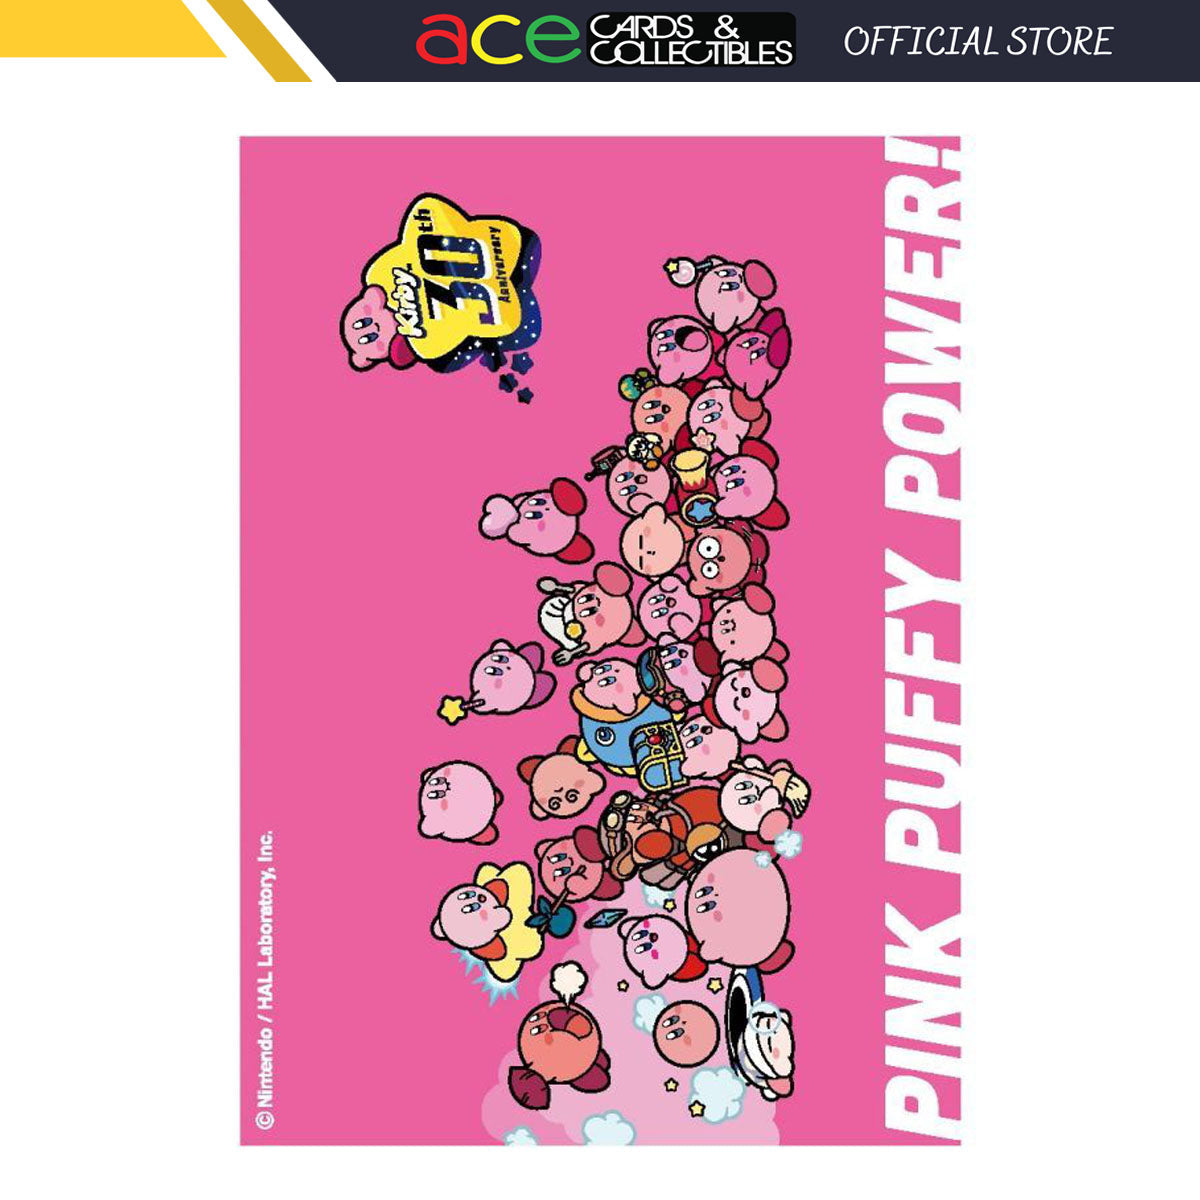 Kirby's Dream Land 30th Character Sleeve Collection [EN-1088] "Main (P)"-Ensky-Ace Cards & Collectibles